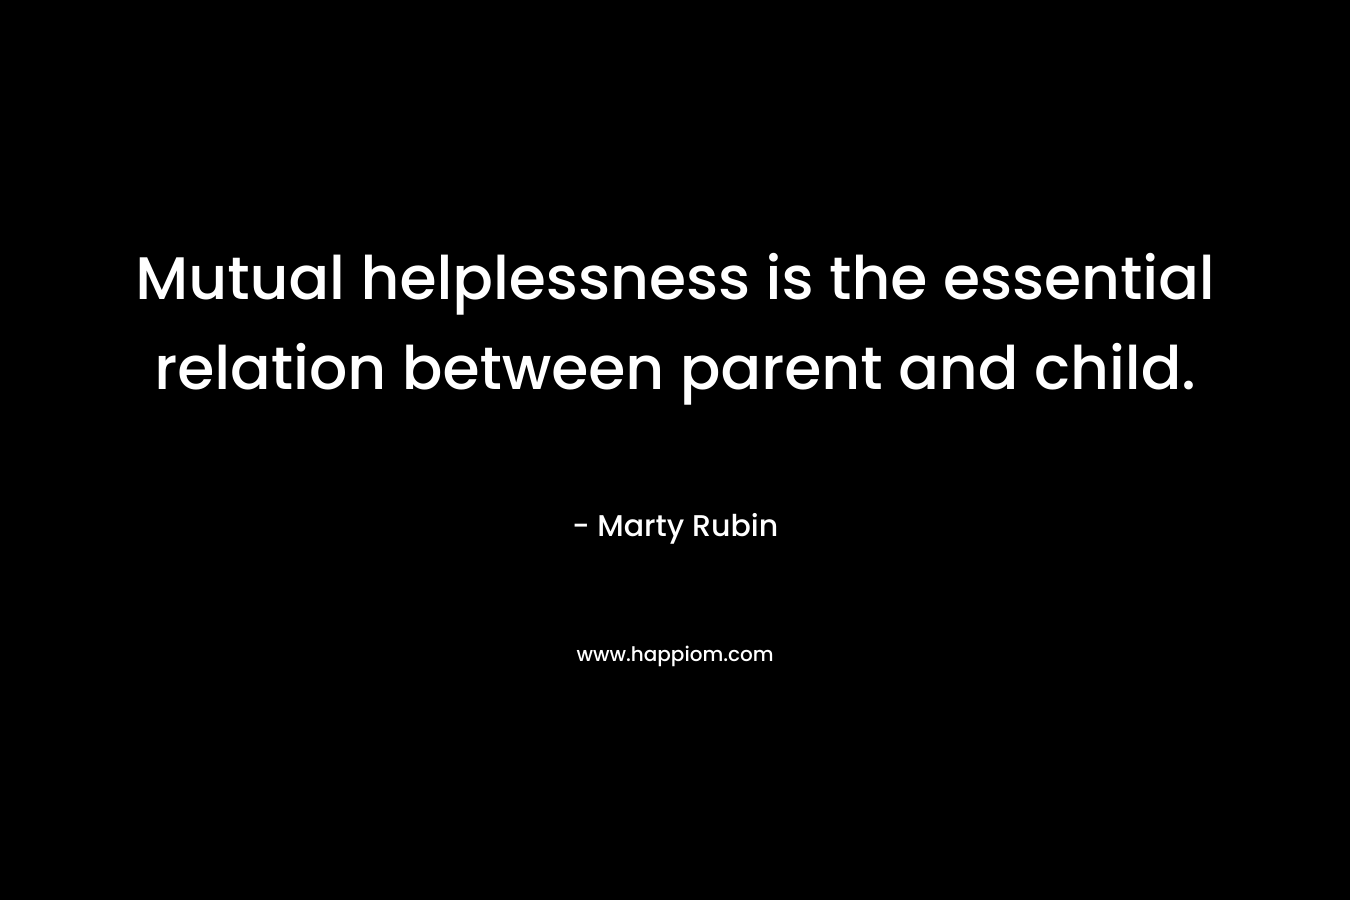 Mutual helplessness is the essential relation between parent and child. – Marty Rubin